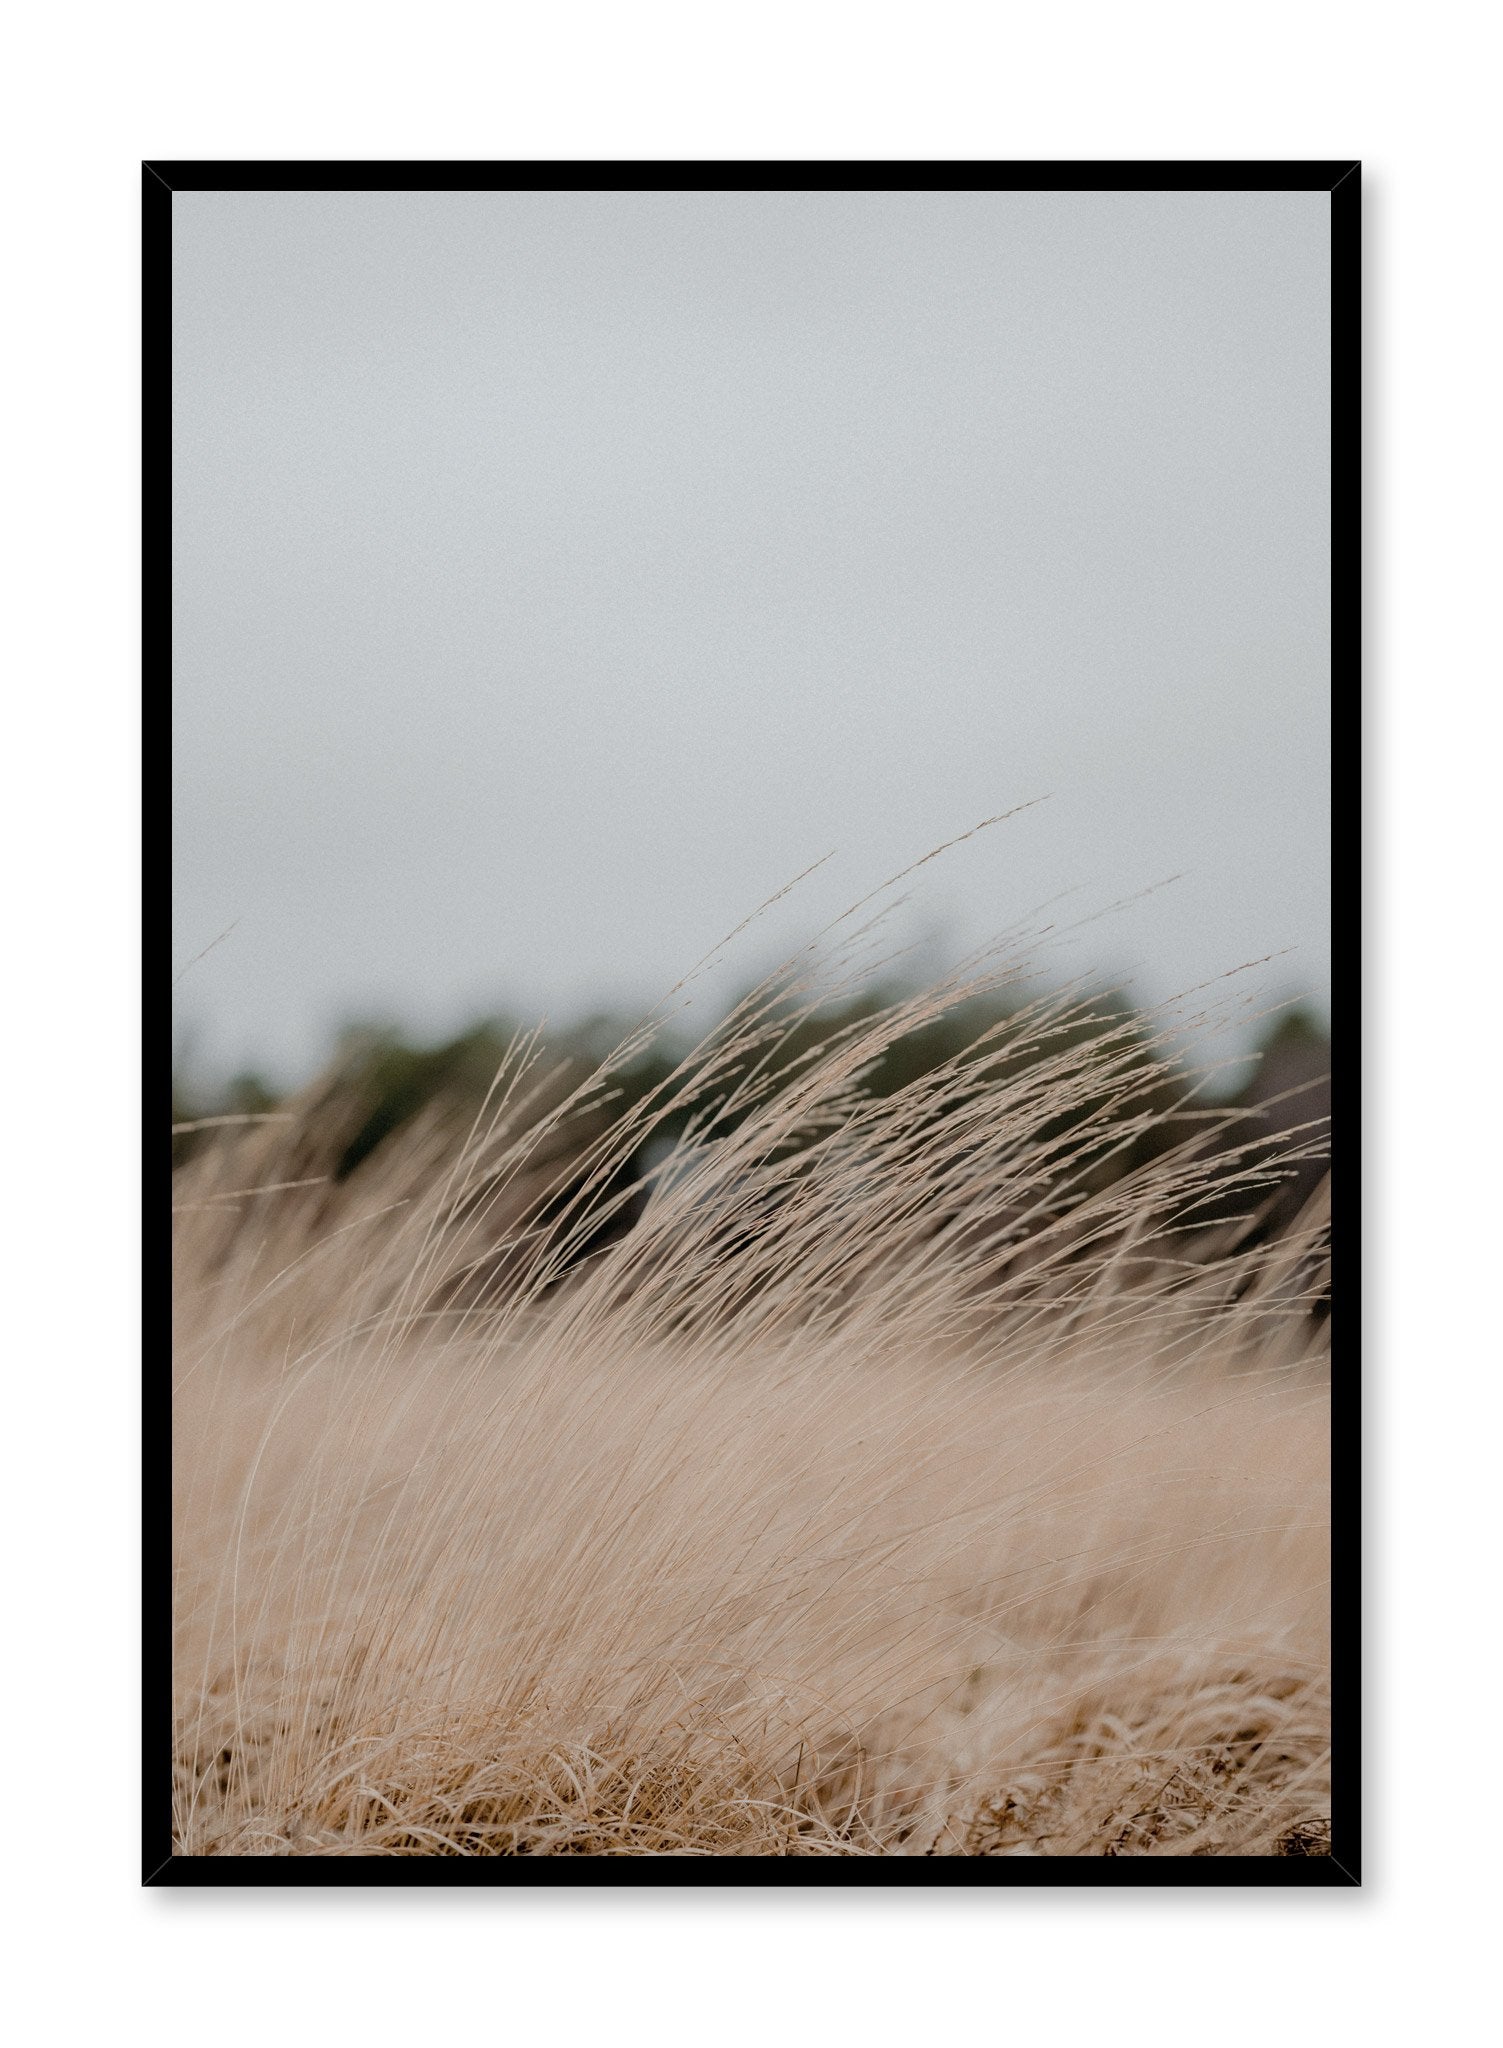 "Autumn Breeze" is a botanical photography poster by Opposite Wall of fine and delicate beige grasses swaying in the wind during the fall season.